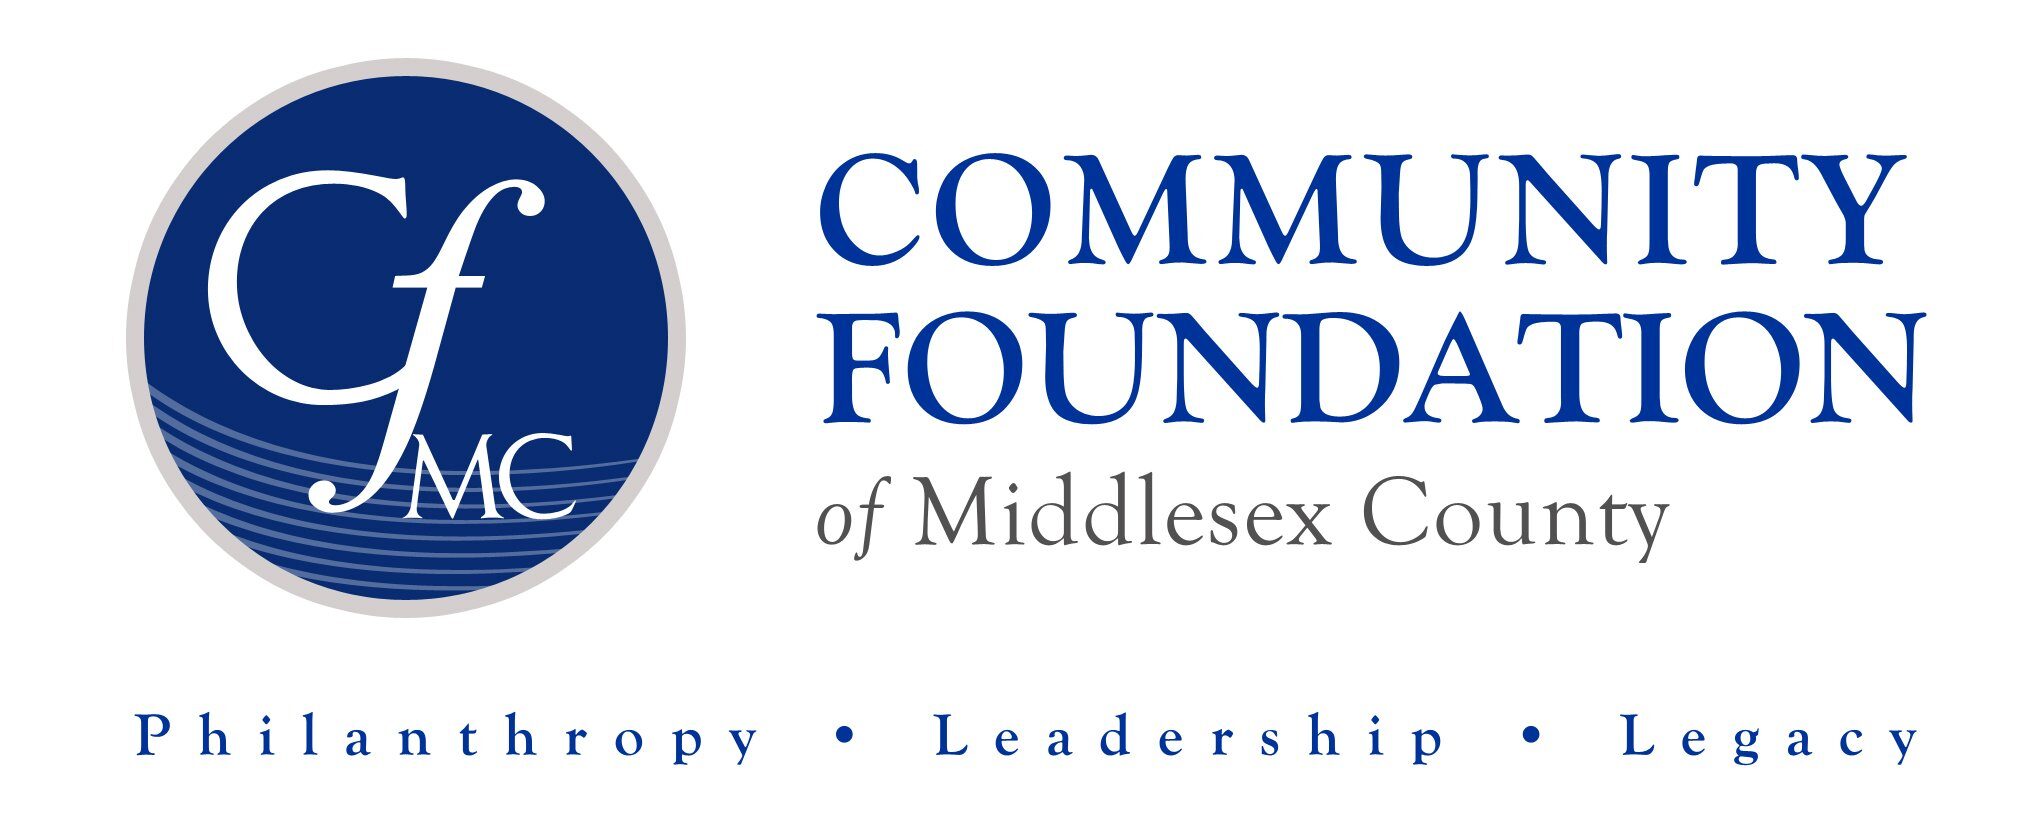 Community Foundation of Middlesex County